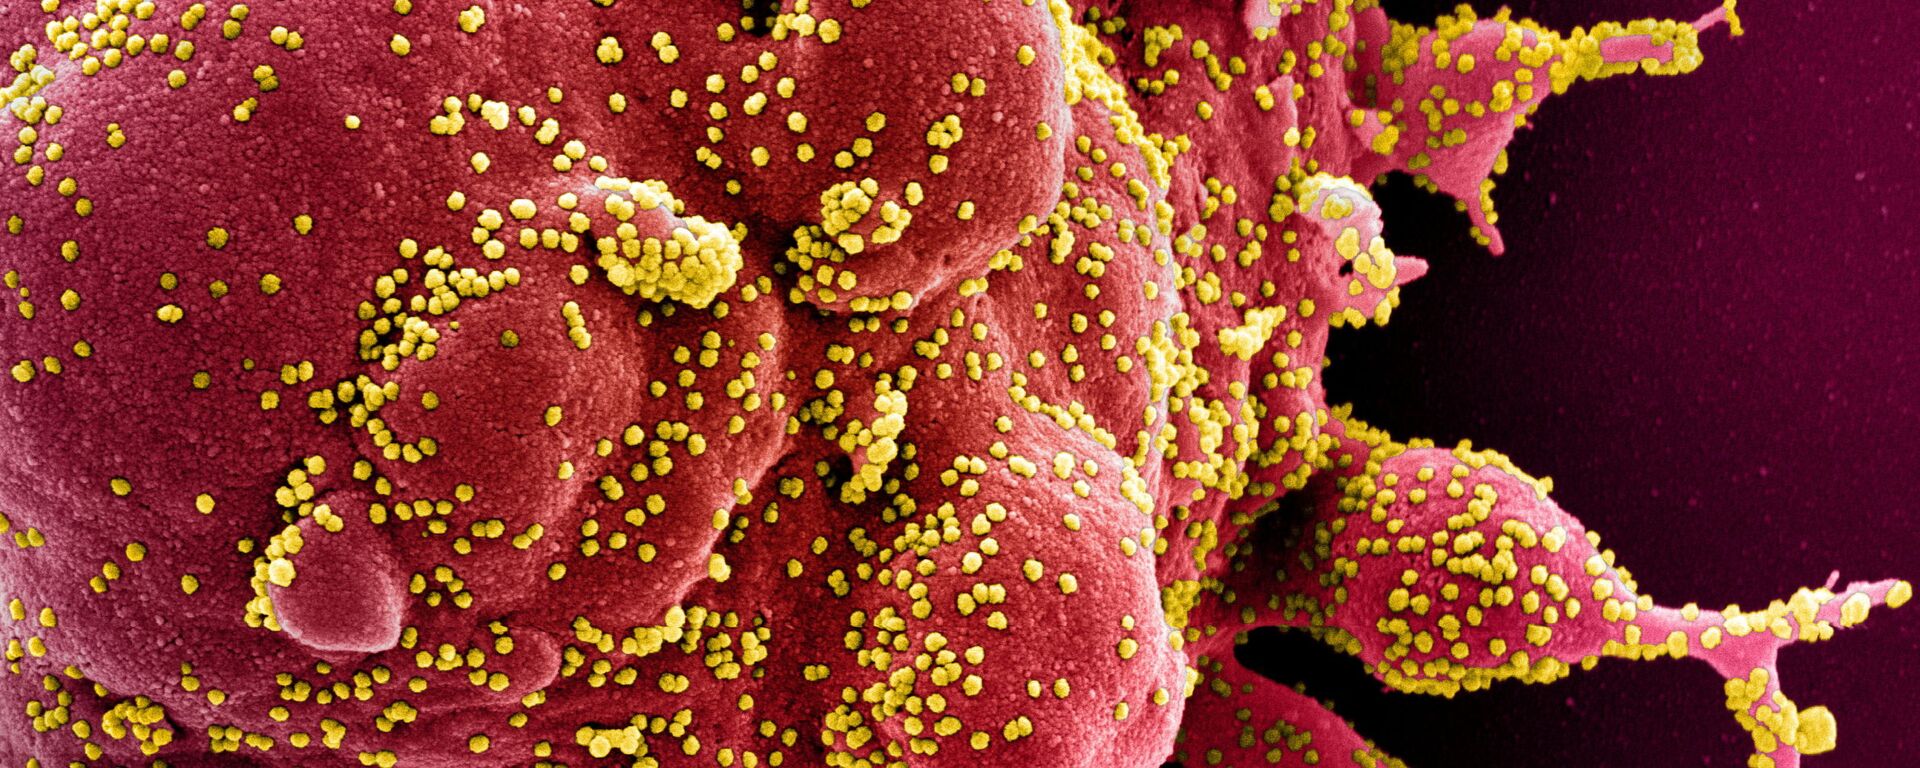 Colorized scanning electron micrograph of an apoptotic cell (red) infected with SARS-COV-2 virus particles (yellow), also known as novel coronavirus, isolated from a patient sample. Image captured at the NIAID Integrated Research Facility (IRF) in Fort Detrick, Maryland - Sputnik International, 1920, 12.07.2021